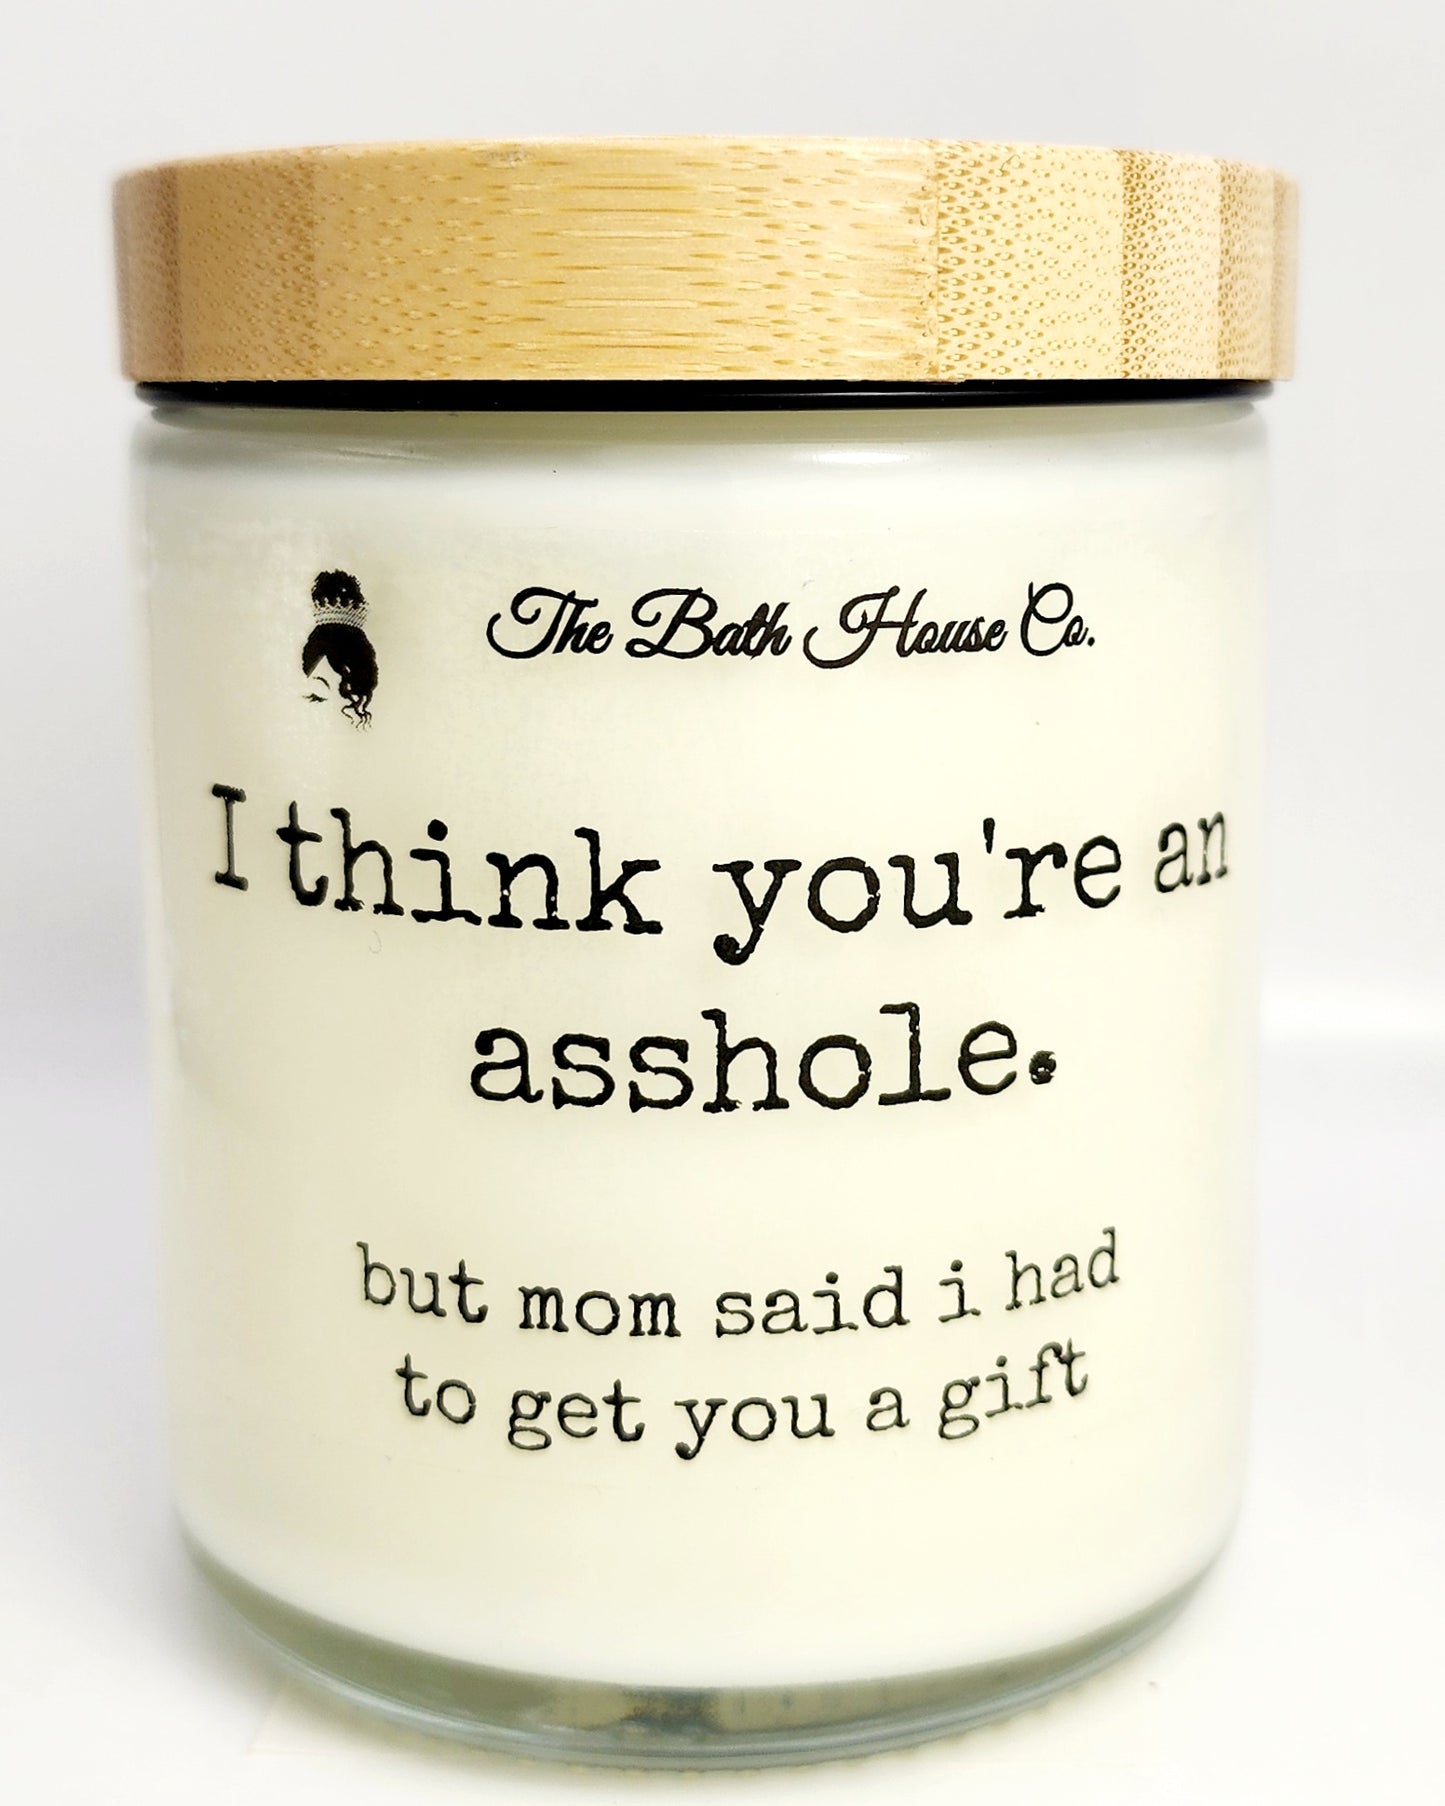 I think you're an asshole but mom said I have to get you a gift